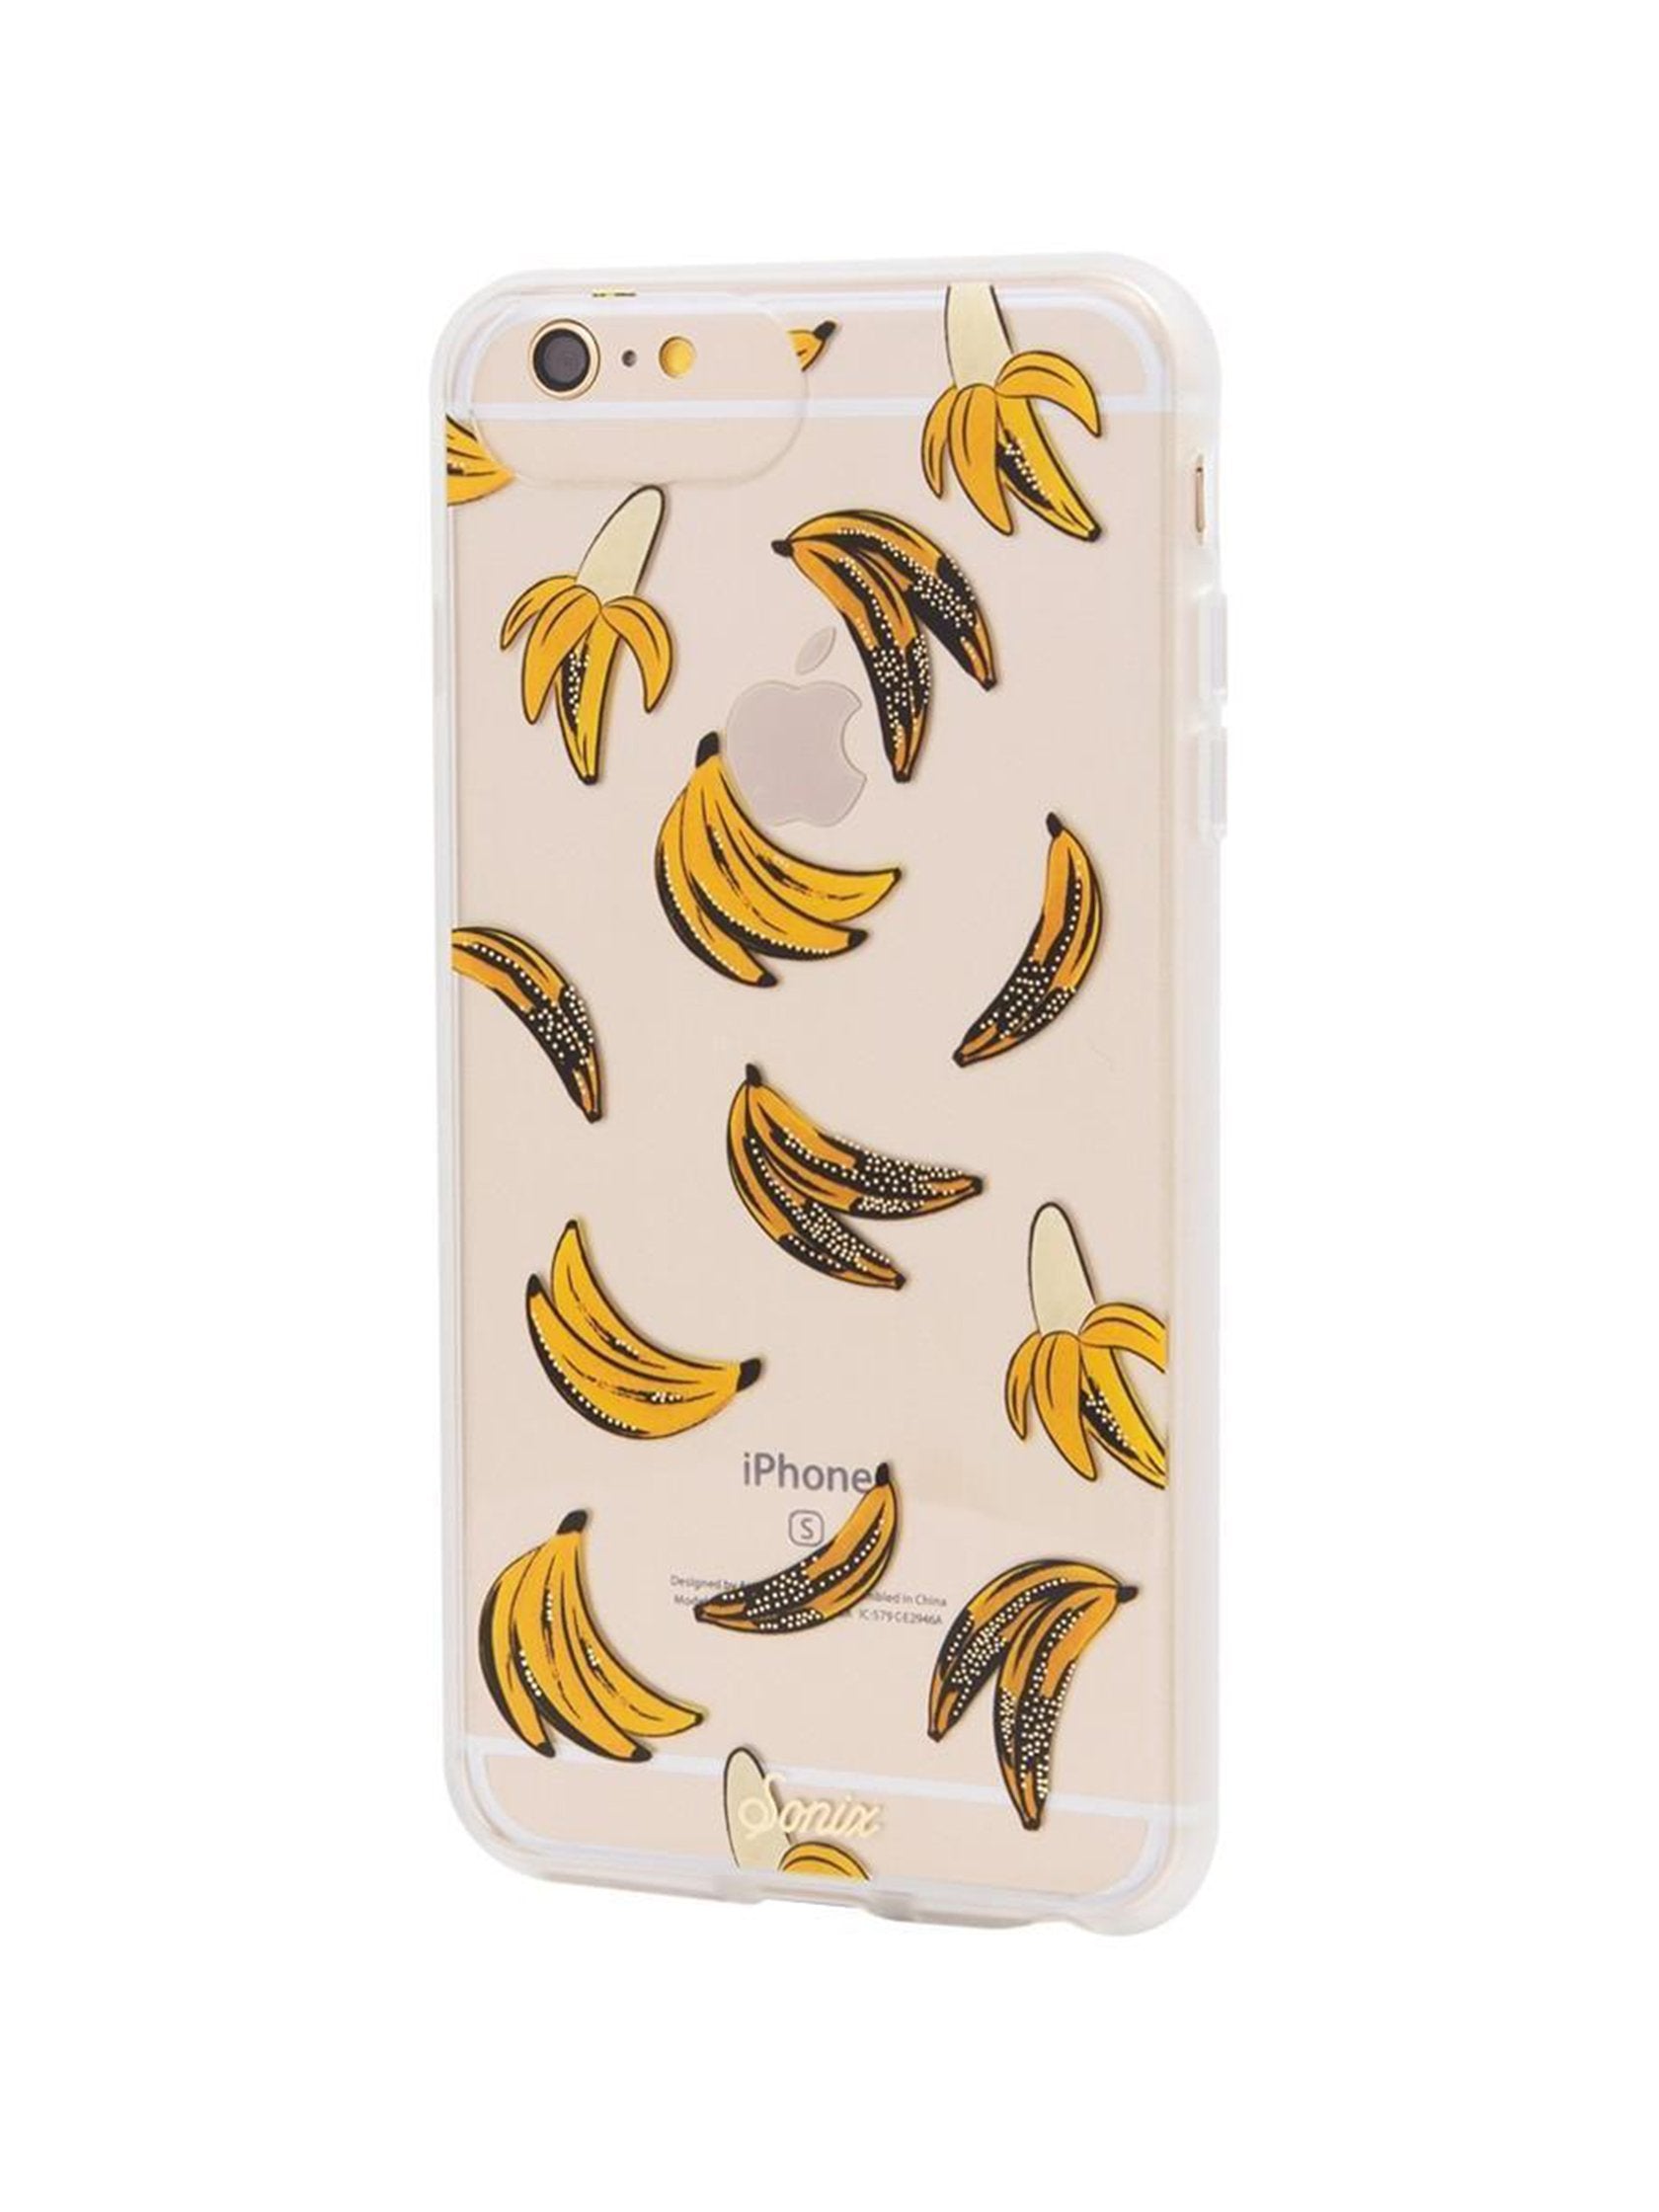 Women outfit in a phone case rental from Sonix called Banana Babe